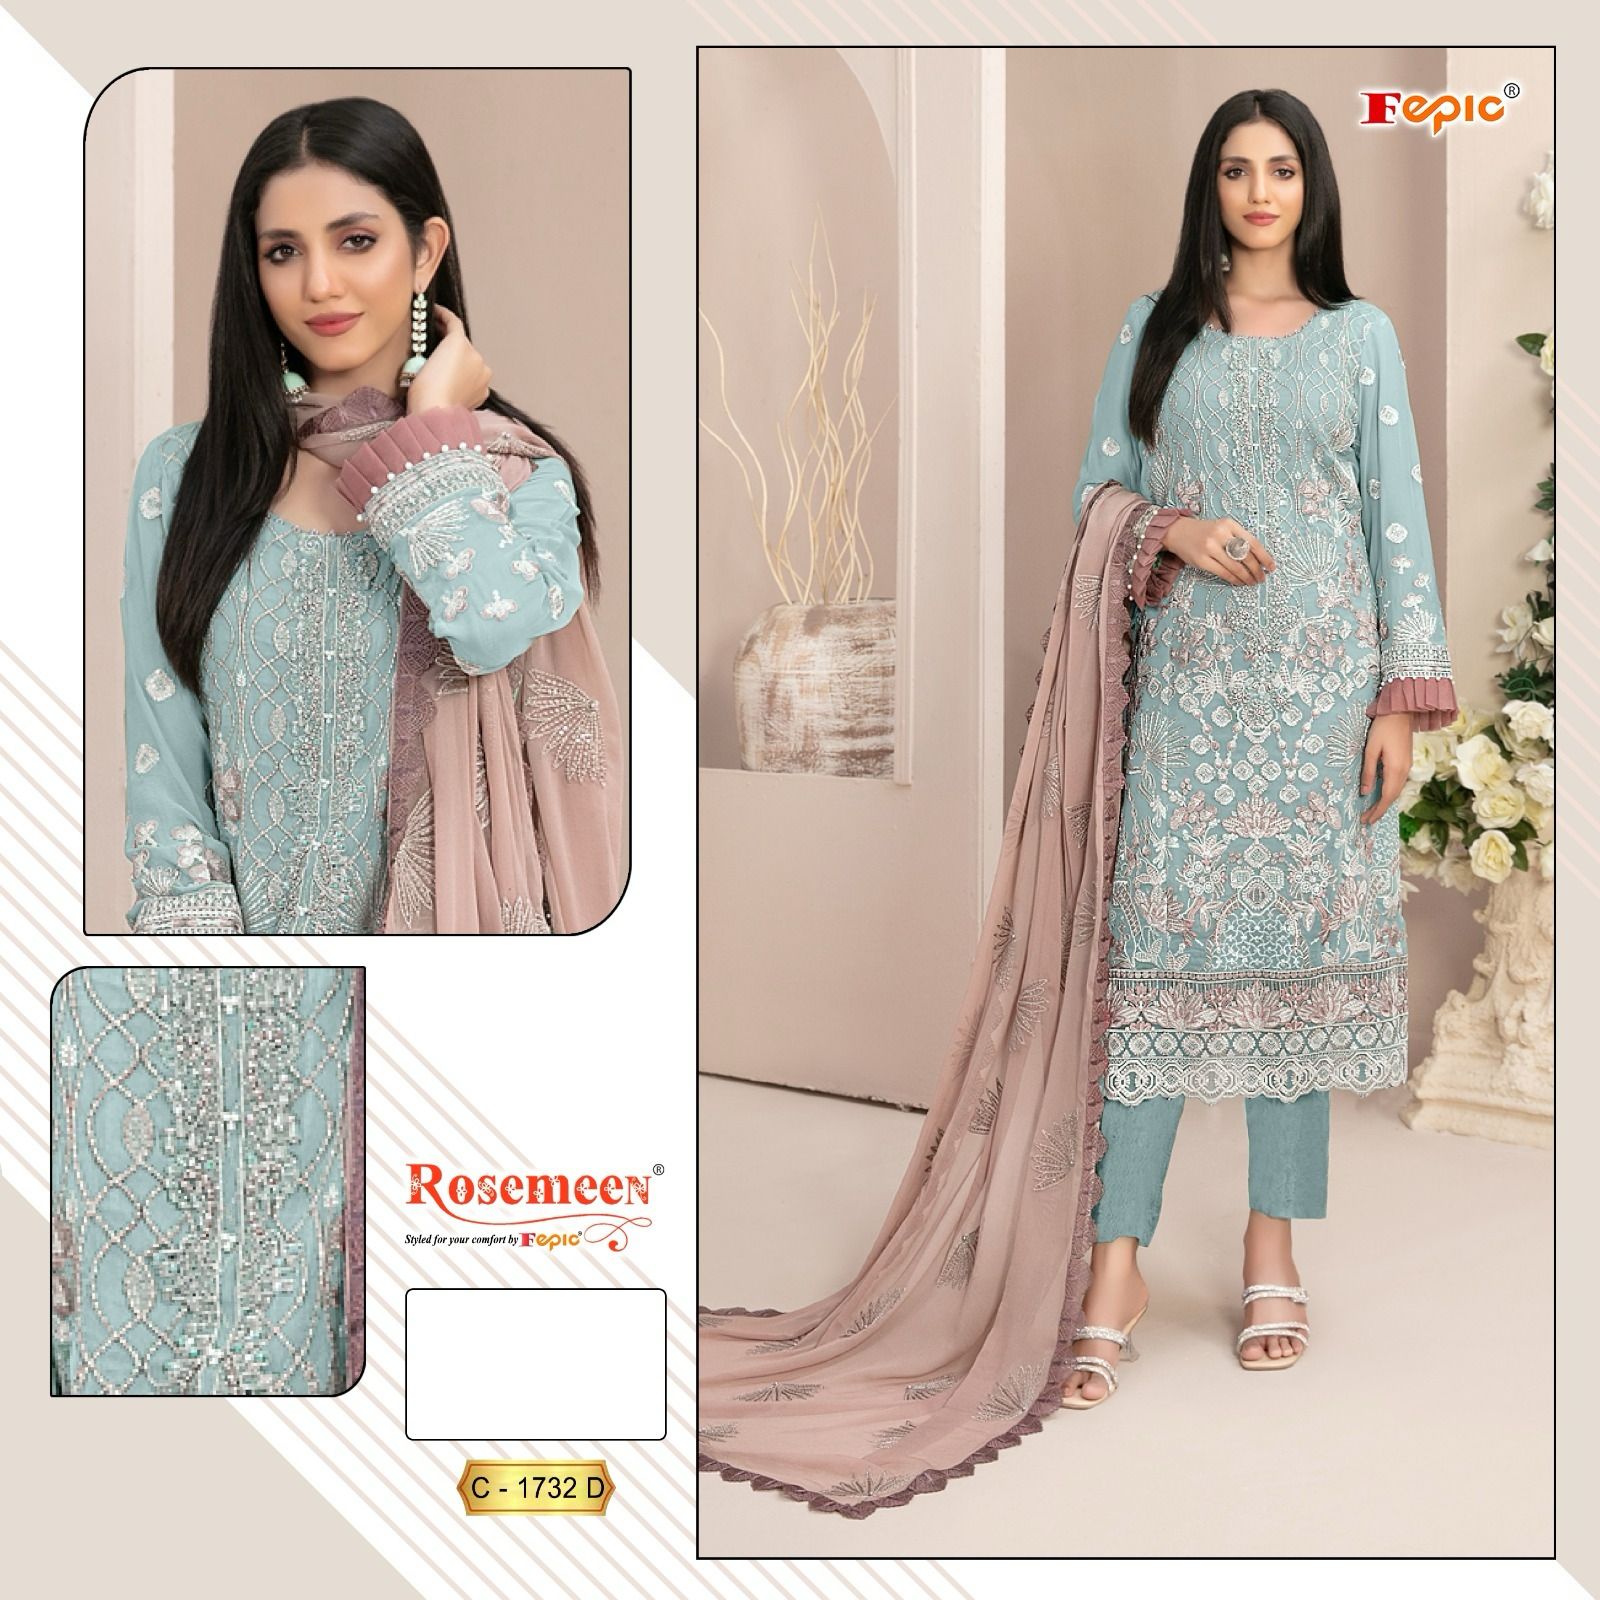 FEPIC C 1732 ROSEMEEN SALWAR SUITS IN COLOURS